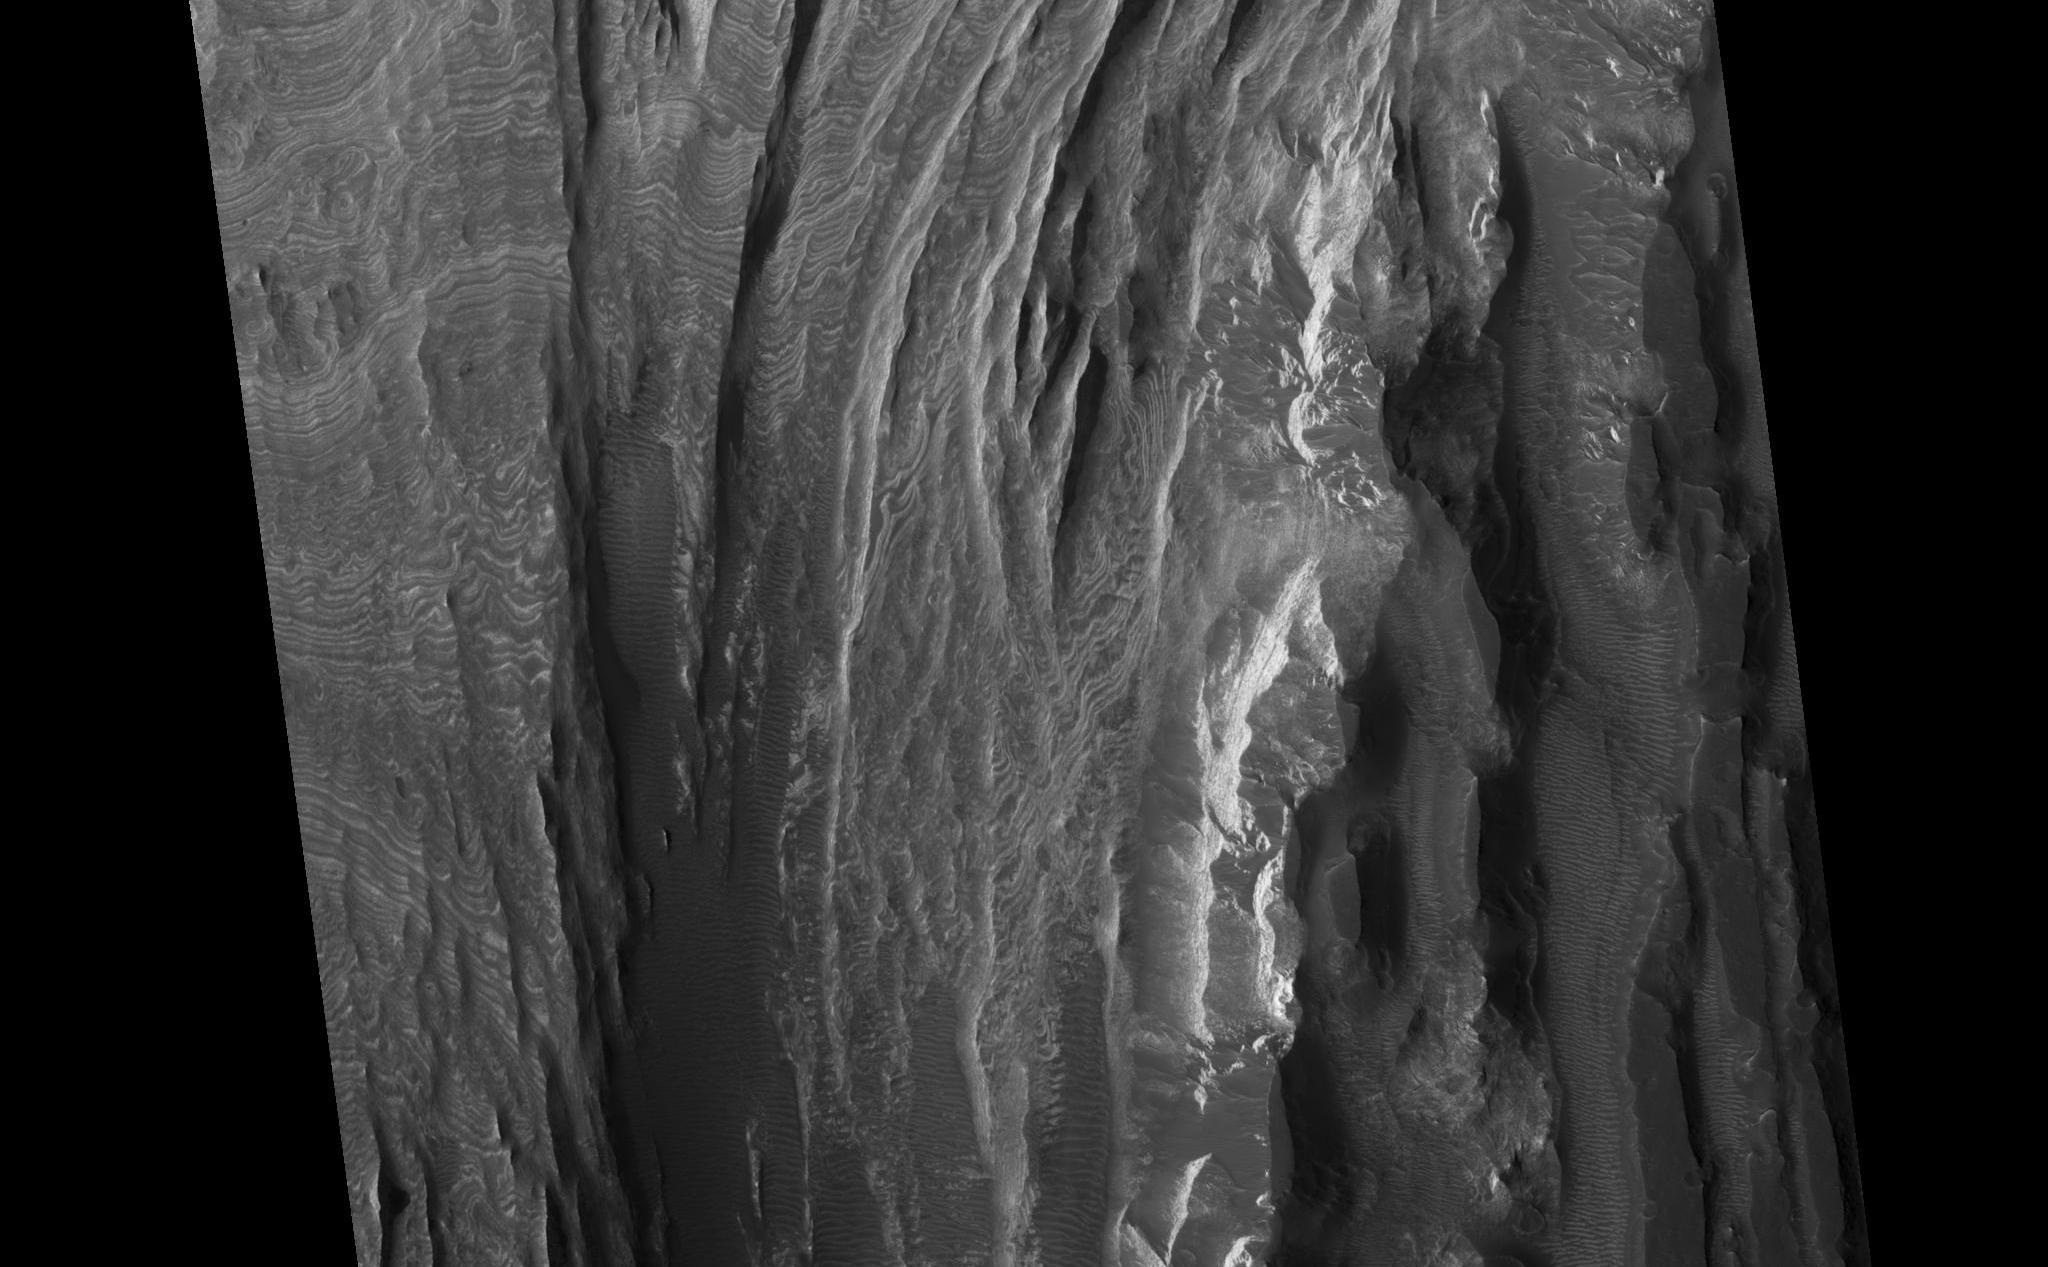 This HiRISE image shows a portion of interior layered deposits (ILD) in Juventae Chasma. Juventae Chasma is a large depression near the equatorial canyon system Valles Marineris. The scene is along the top of a mound of layered deposits on the floor of Juventae Chasma. Dunes are seen in the low-lying, darker regions. Very fine layers are also seen (see subimage, approximately 1 km across). Understanding what kinds of materials formed the layers, how they were set in place, and how they have evolved will provide insight into Martian geologic history.